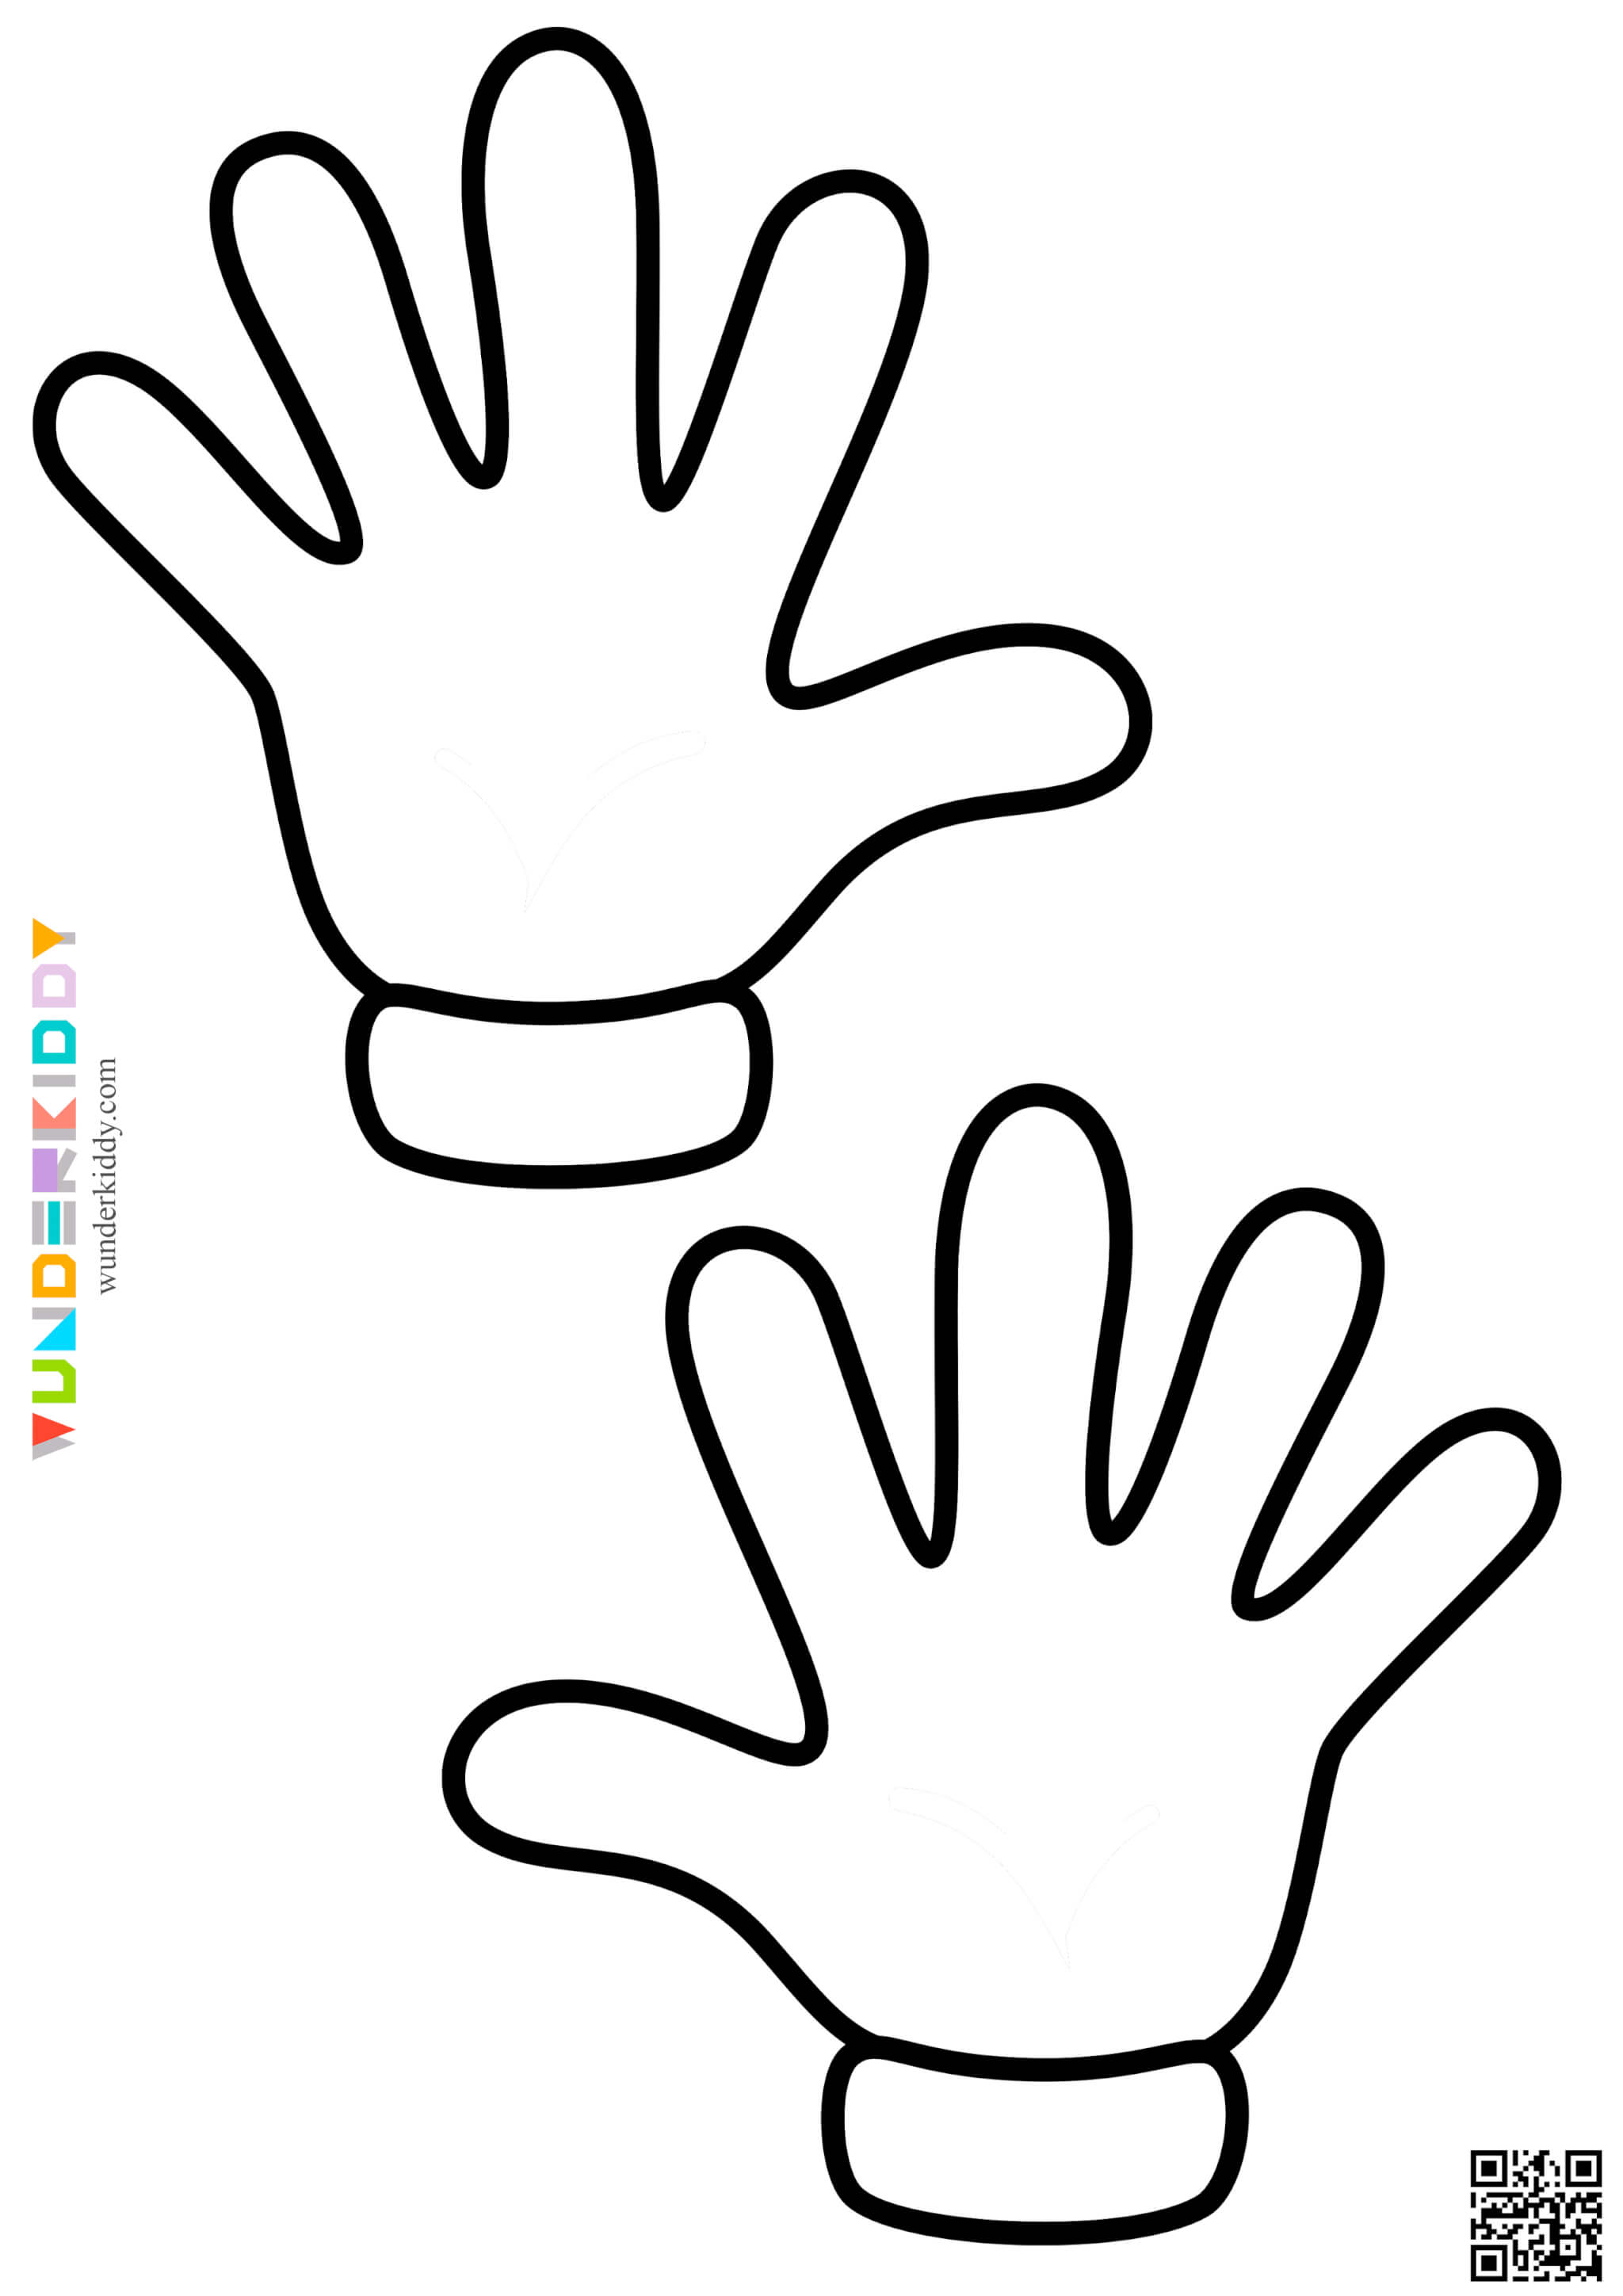 Printable left and right hand blank template for crafts